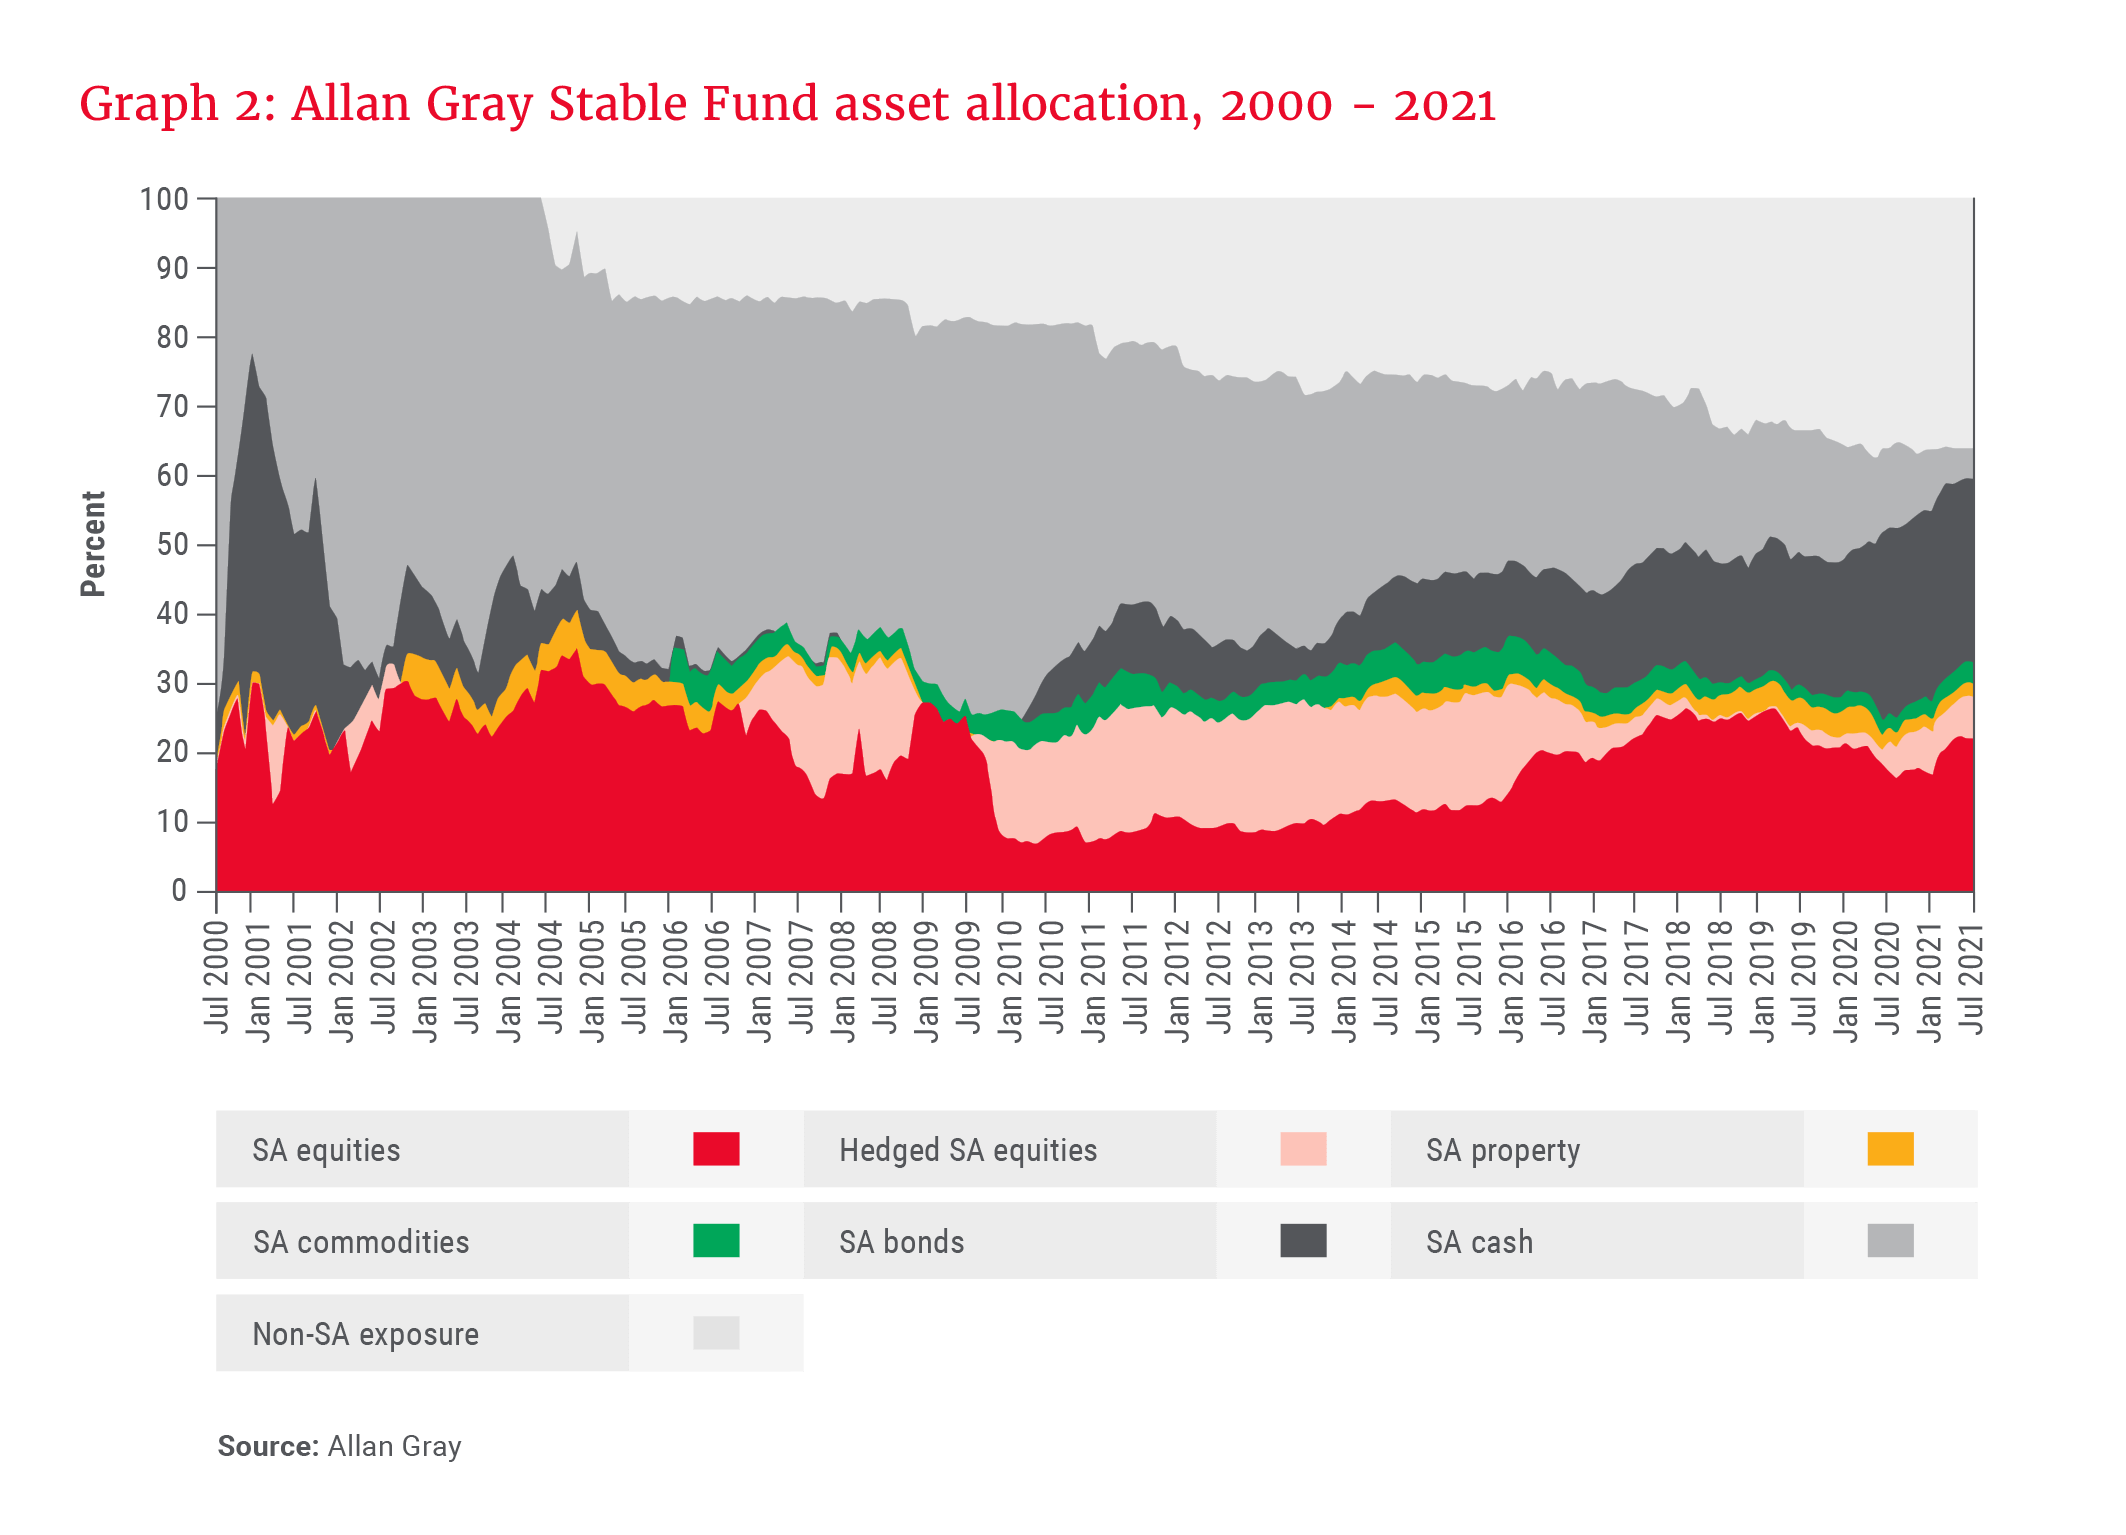 Allan Gray Stable Fund asset allocation, 2000 - 2021